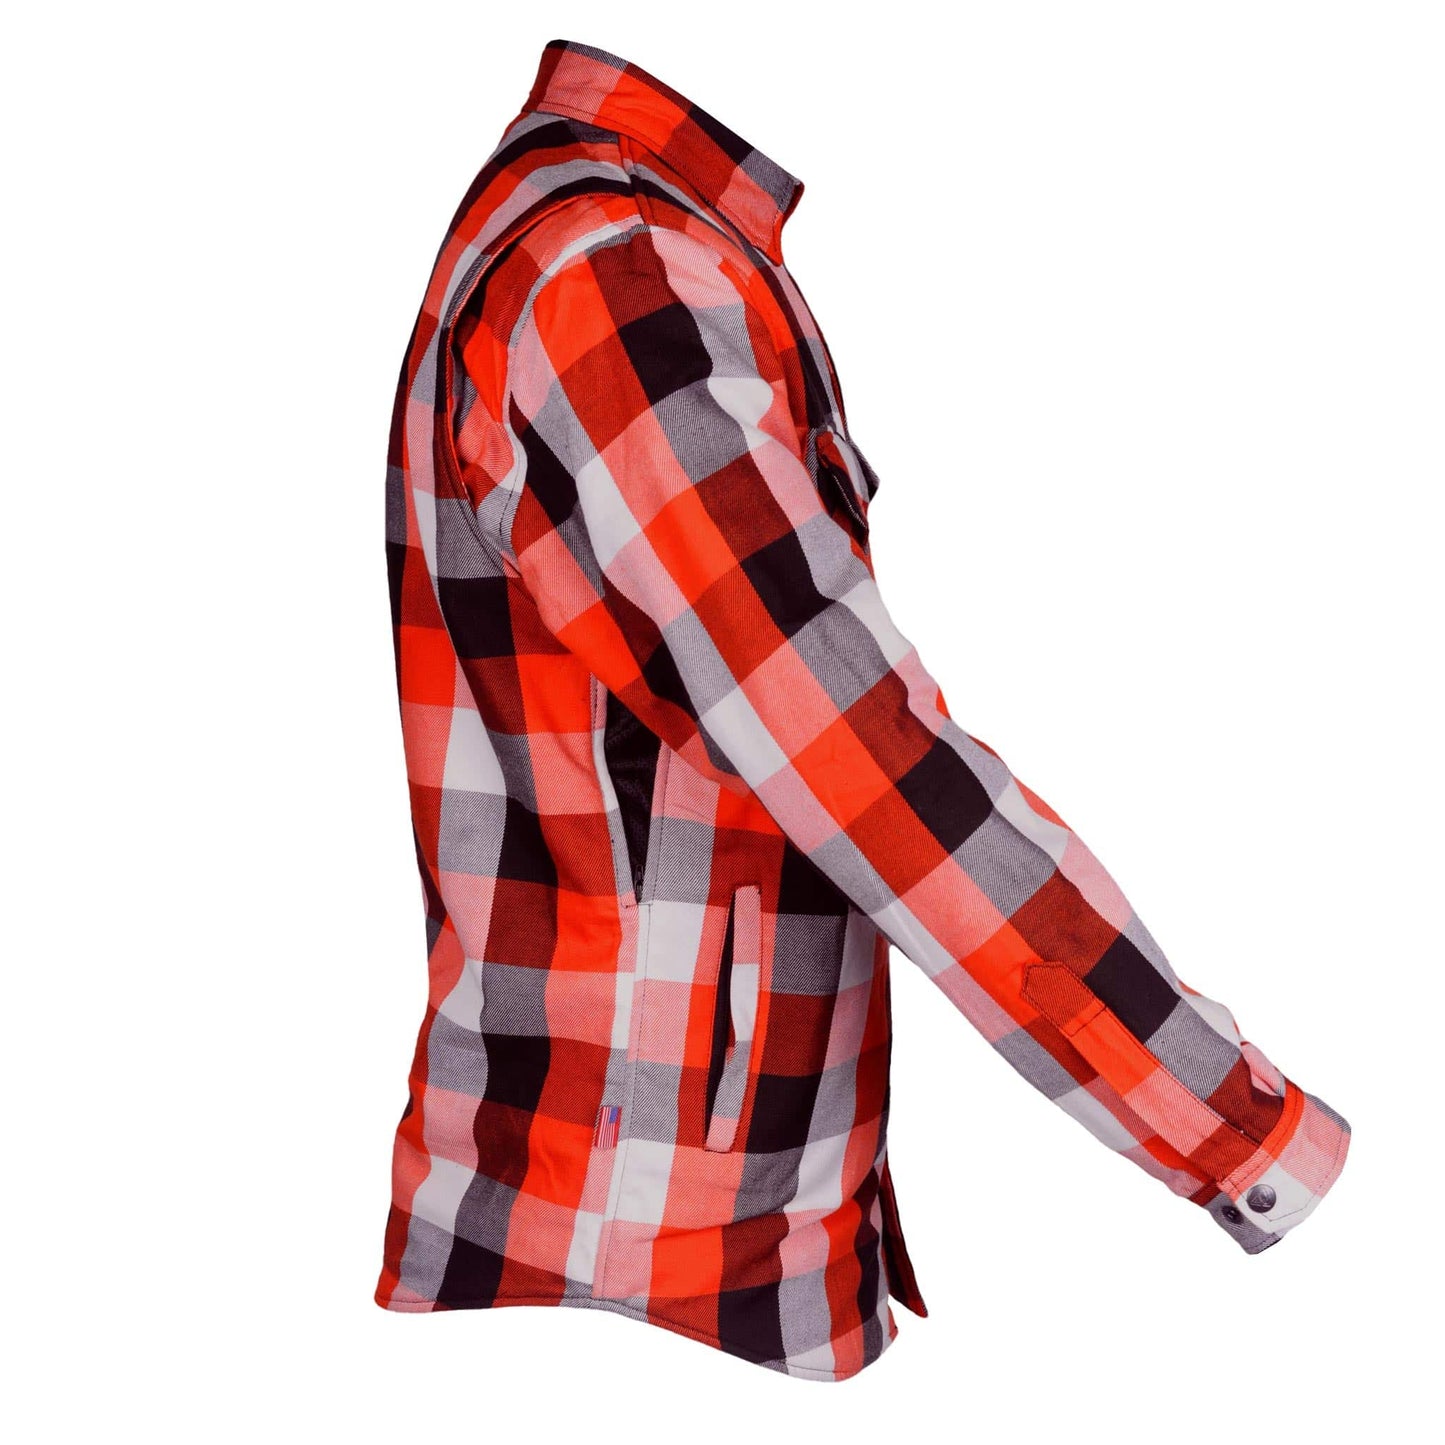 Protective Flannel Shirt "American Dream"  - Red, Black, White Checkered with Level 1 Pads